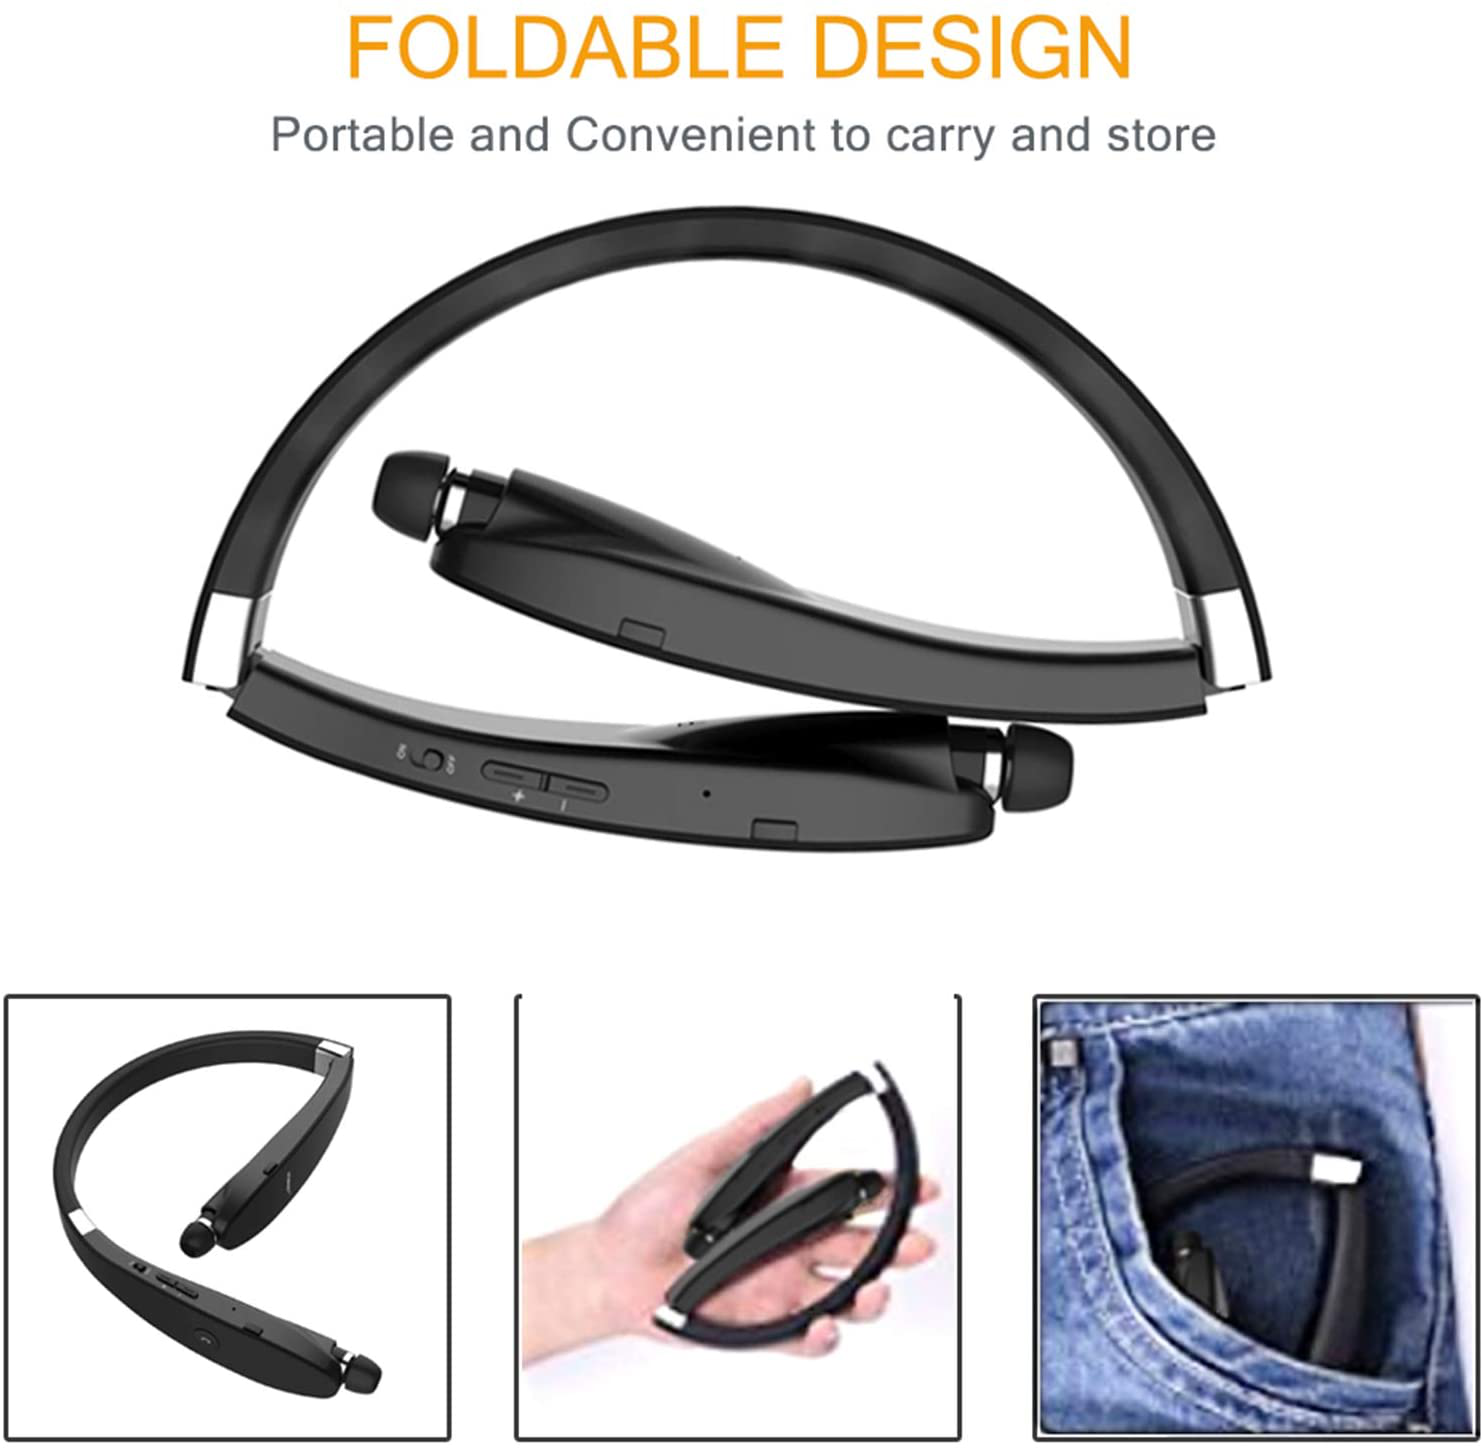 Foldable Bluetooth Headset, Beartwo Lightweight Retractable Bluetooth Headphones for Sports&Exercise, Noise Cancelling Stereo Neckband Wireless Headset (With Carry Case)